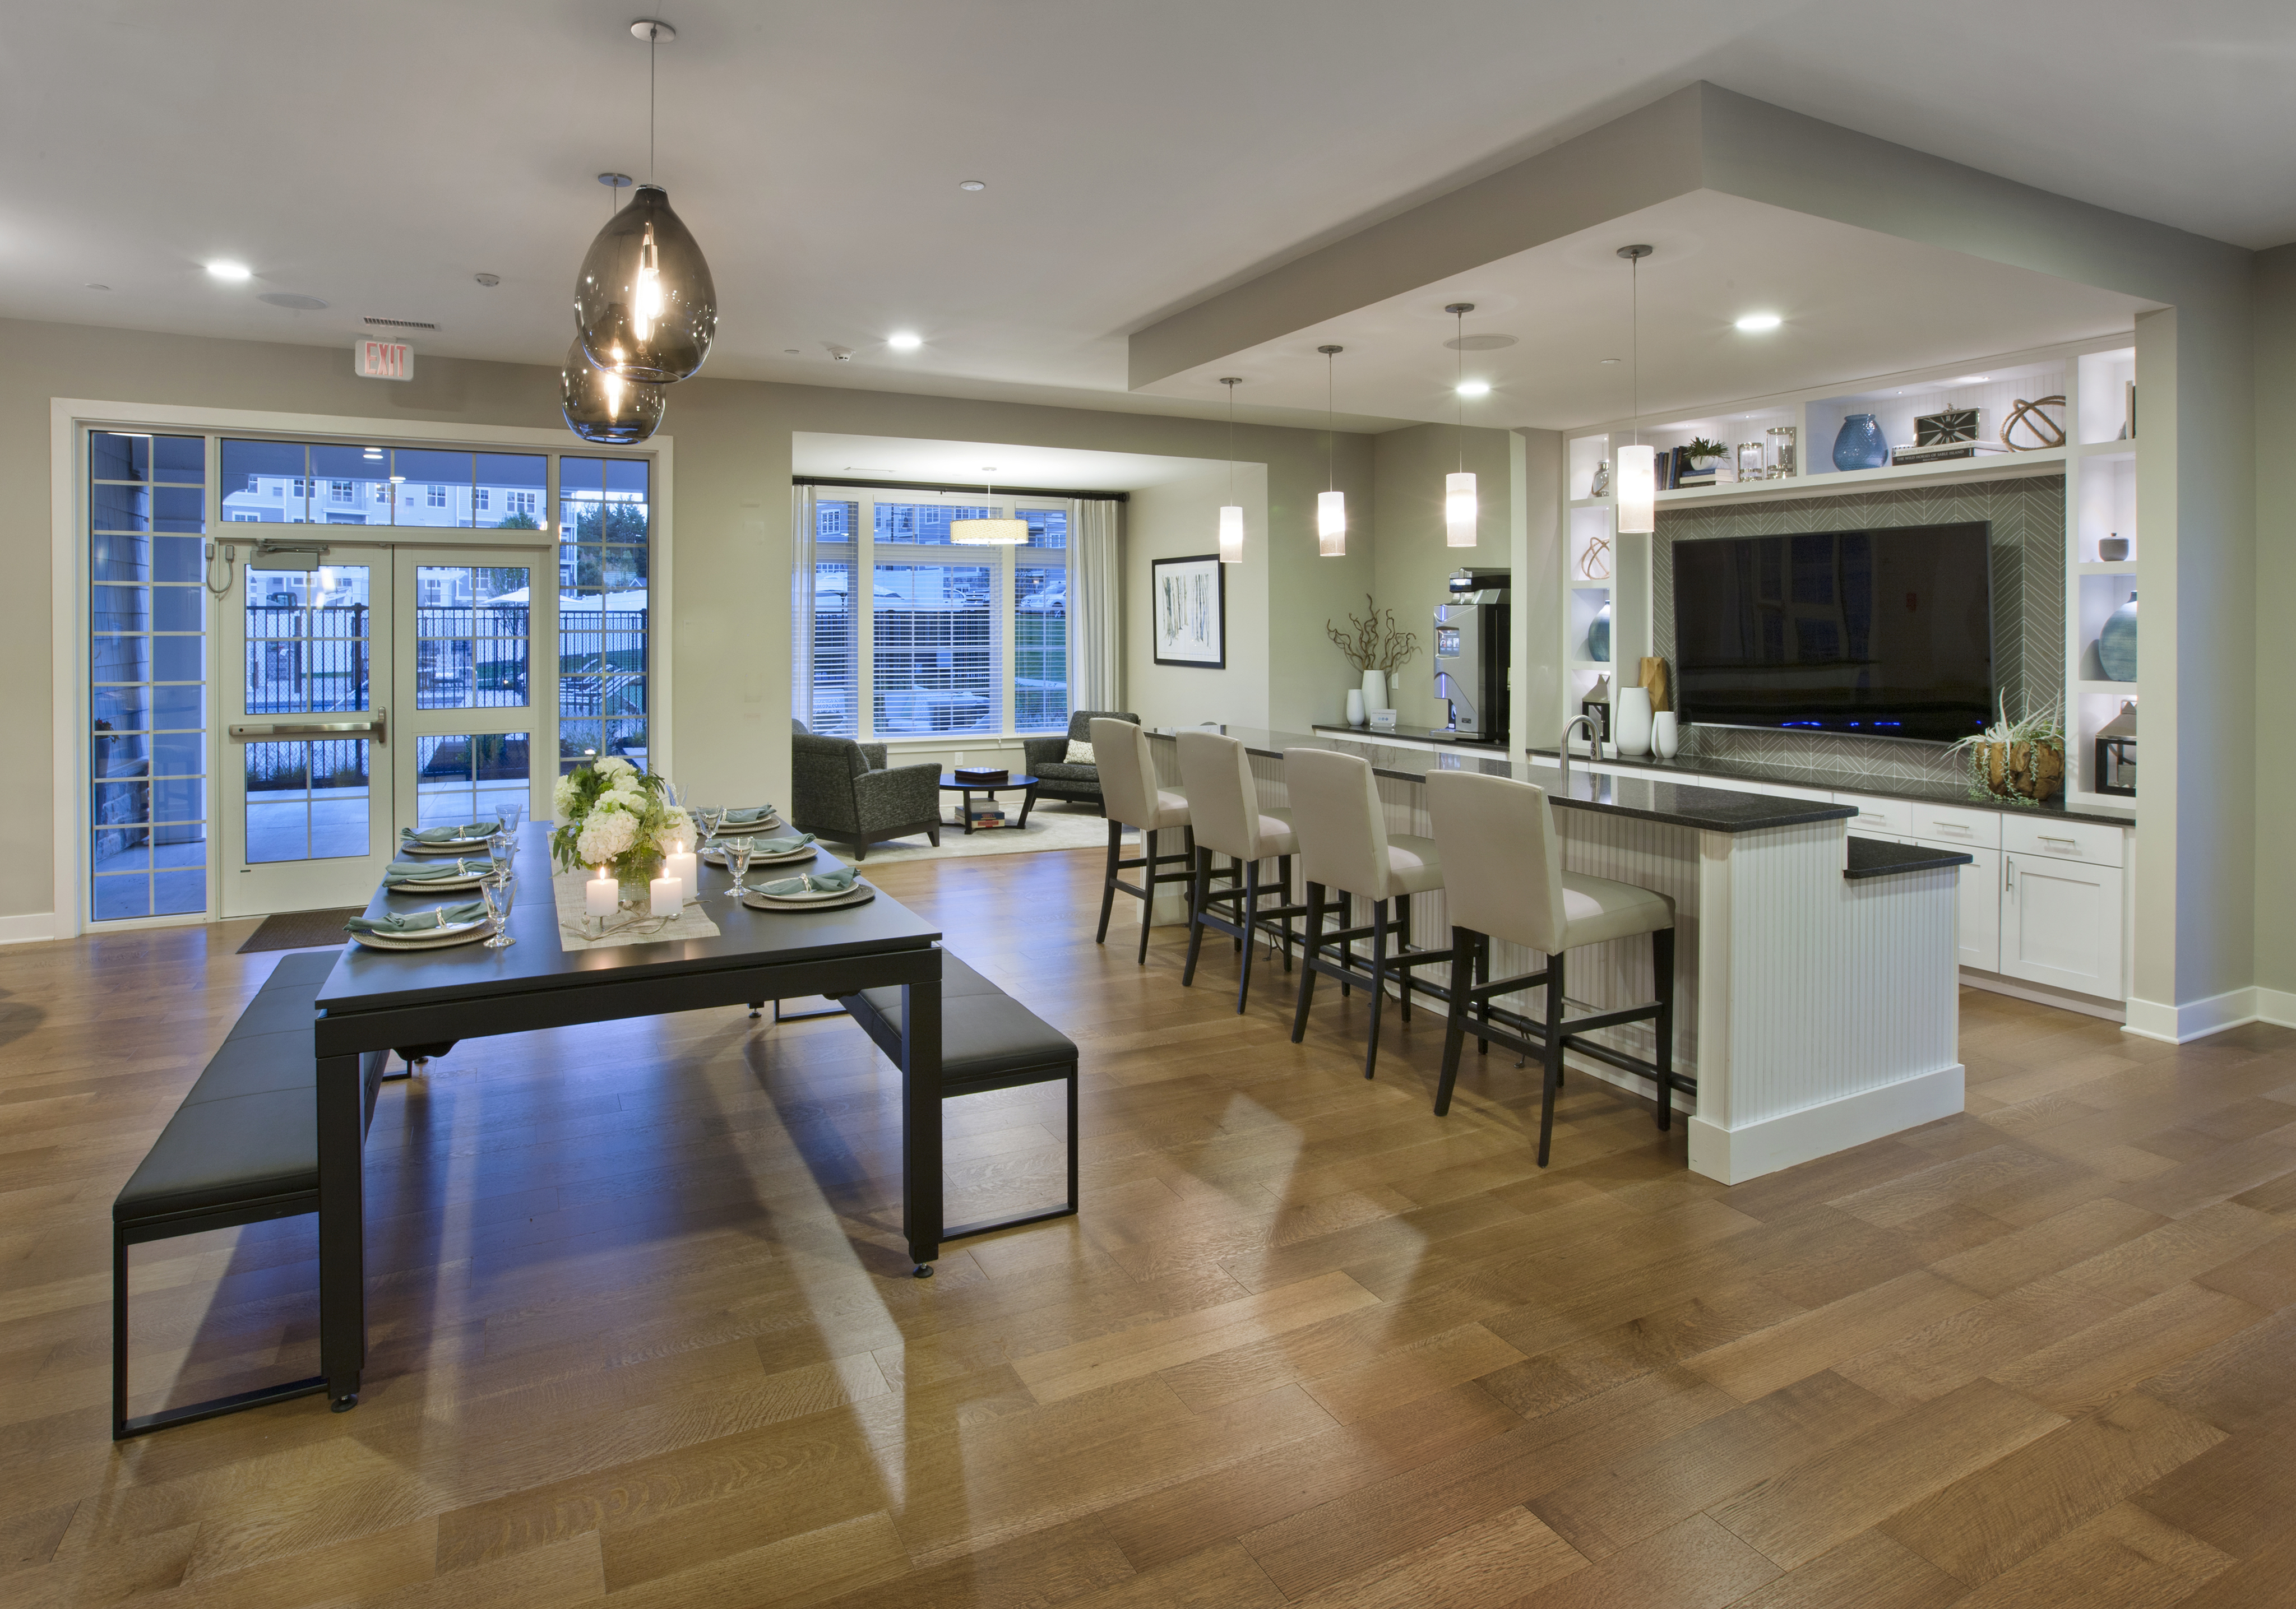 View of Resident Clubhouse, Showing Dining Table, Benches, Kitchen Area, Bar Stools, and Sitting Area at Parc Westborough Apartments